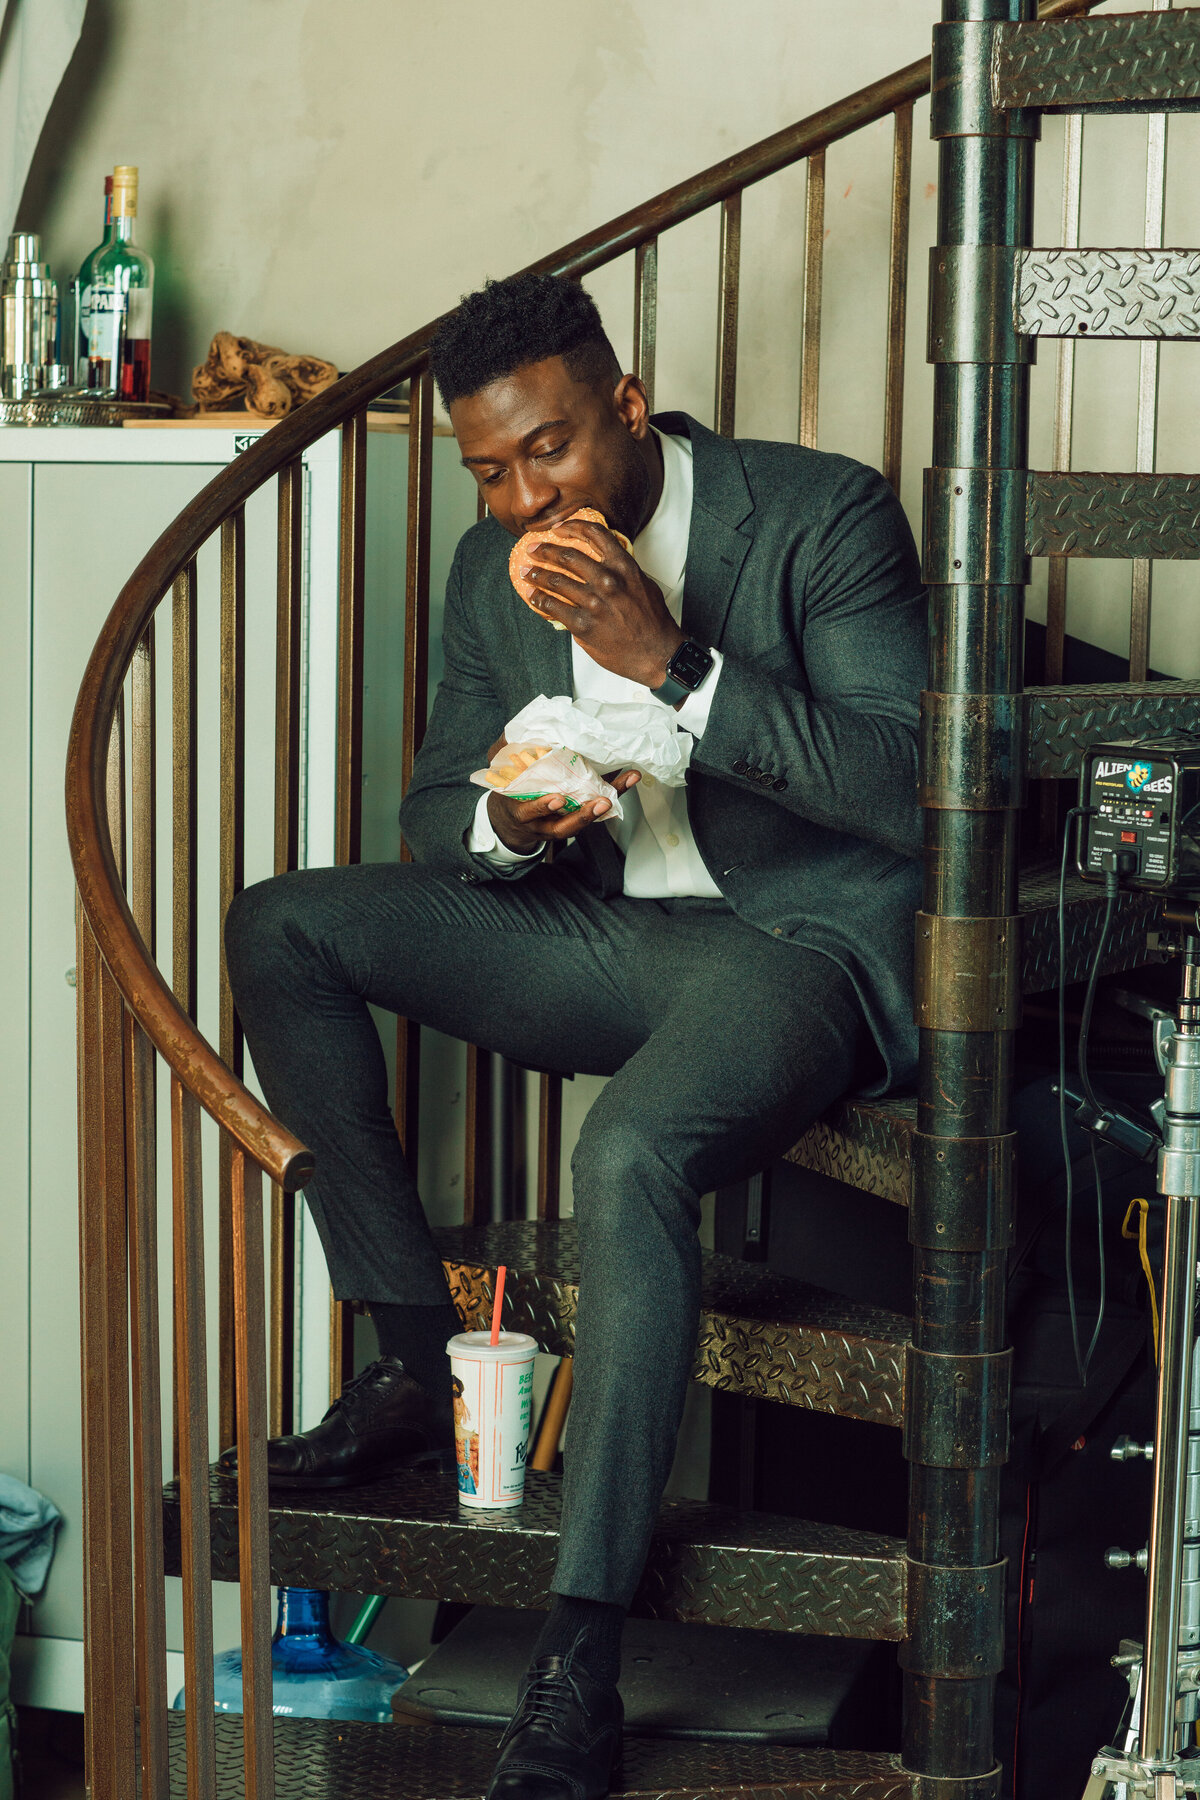 Portrait Photo Of Young Black Man In Suit Eating Hamburger Los Angeles